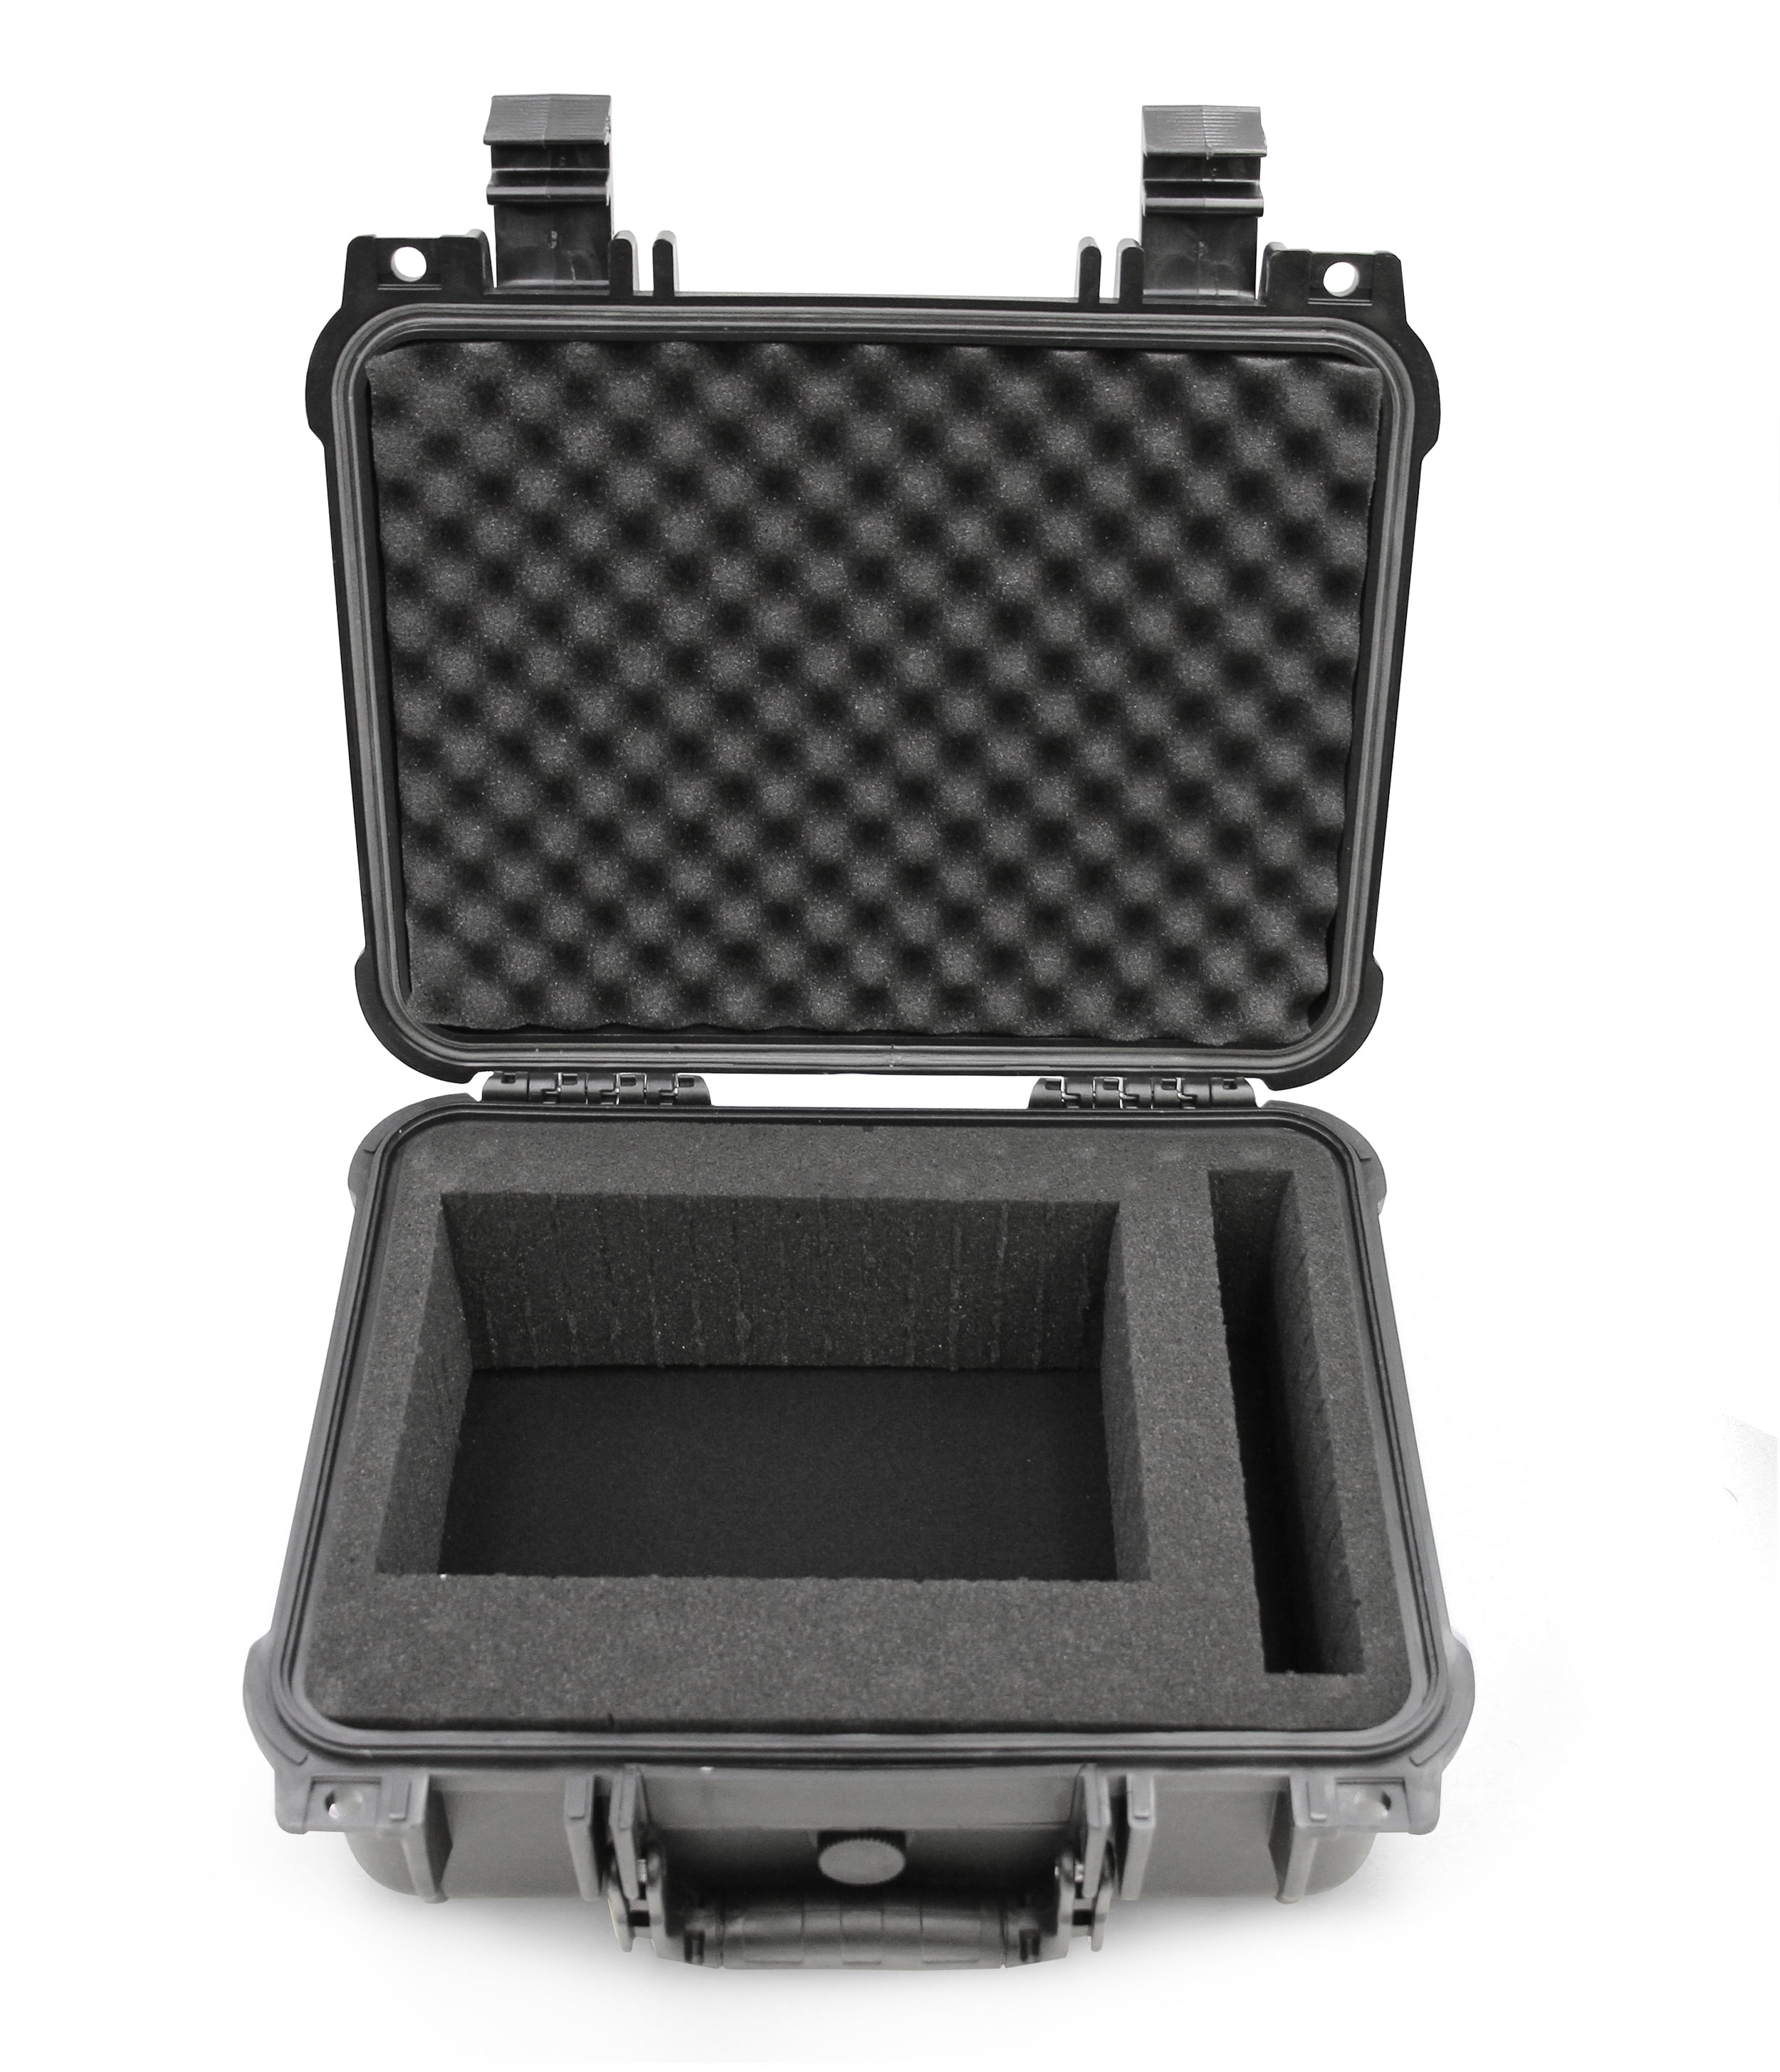 CASEMATIX Protective Travel Case Compatible with Cricut Joy Machine &  Accessories - Features Custom Housing for Paper Cutter, Padded Divider